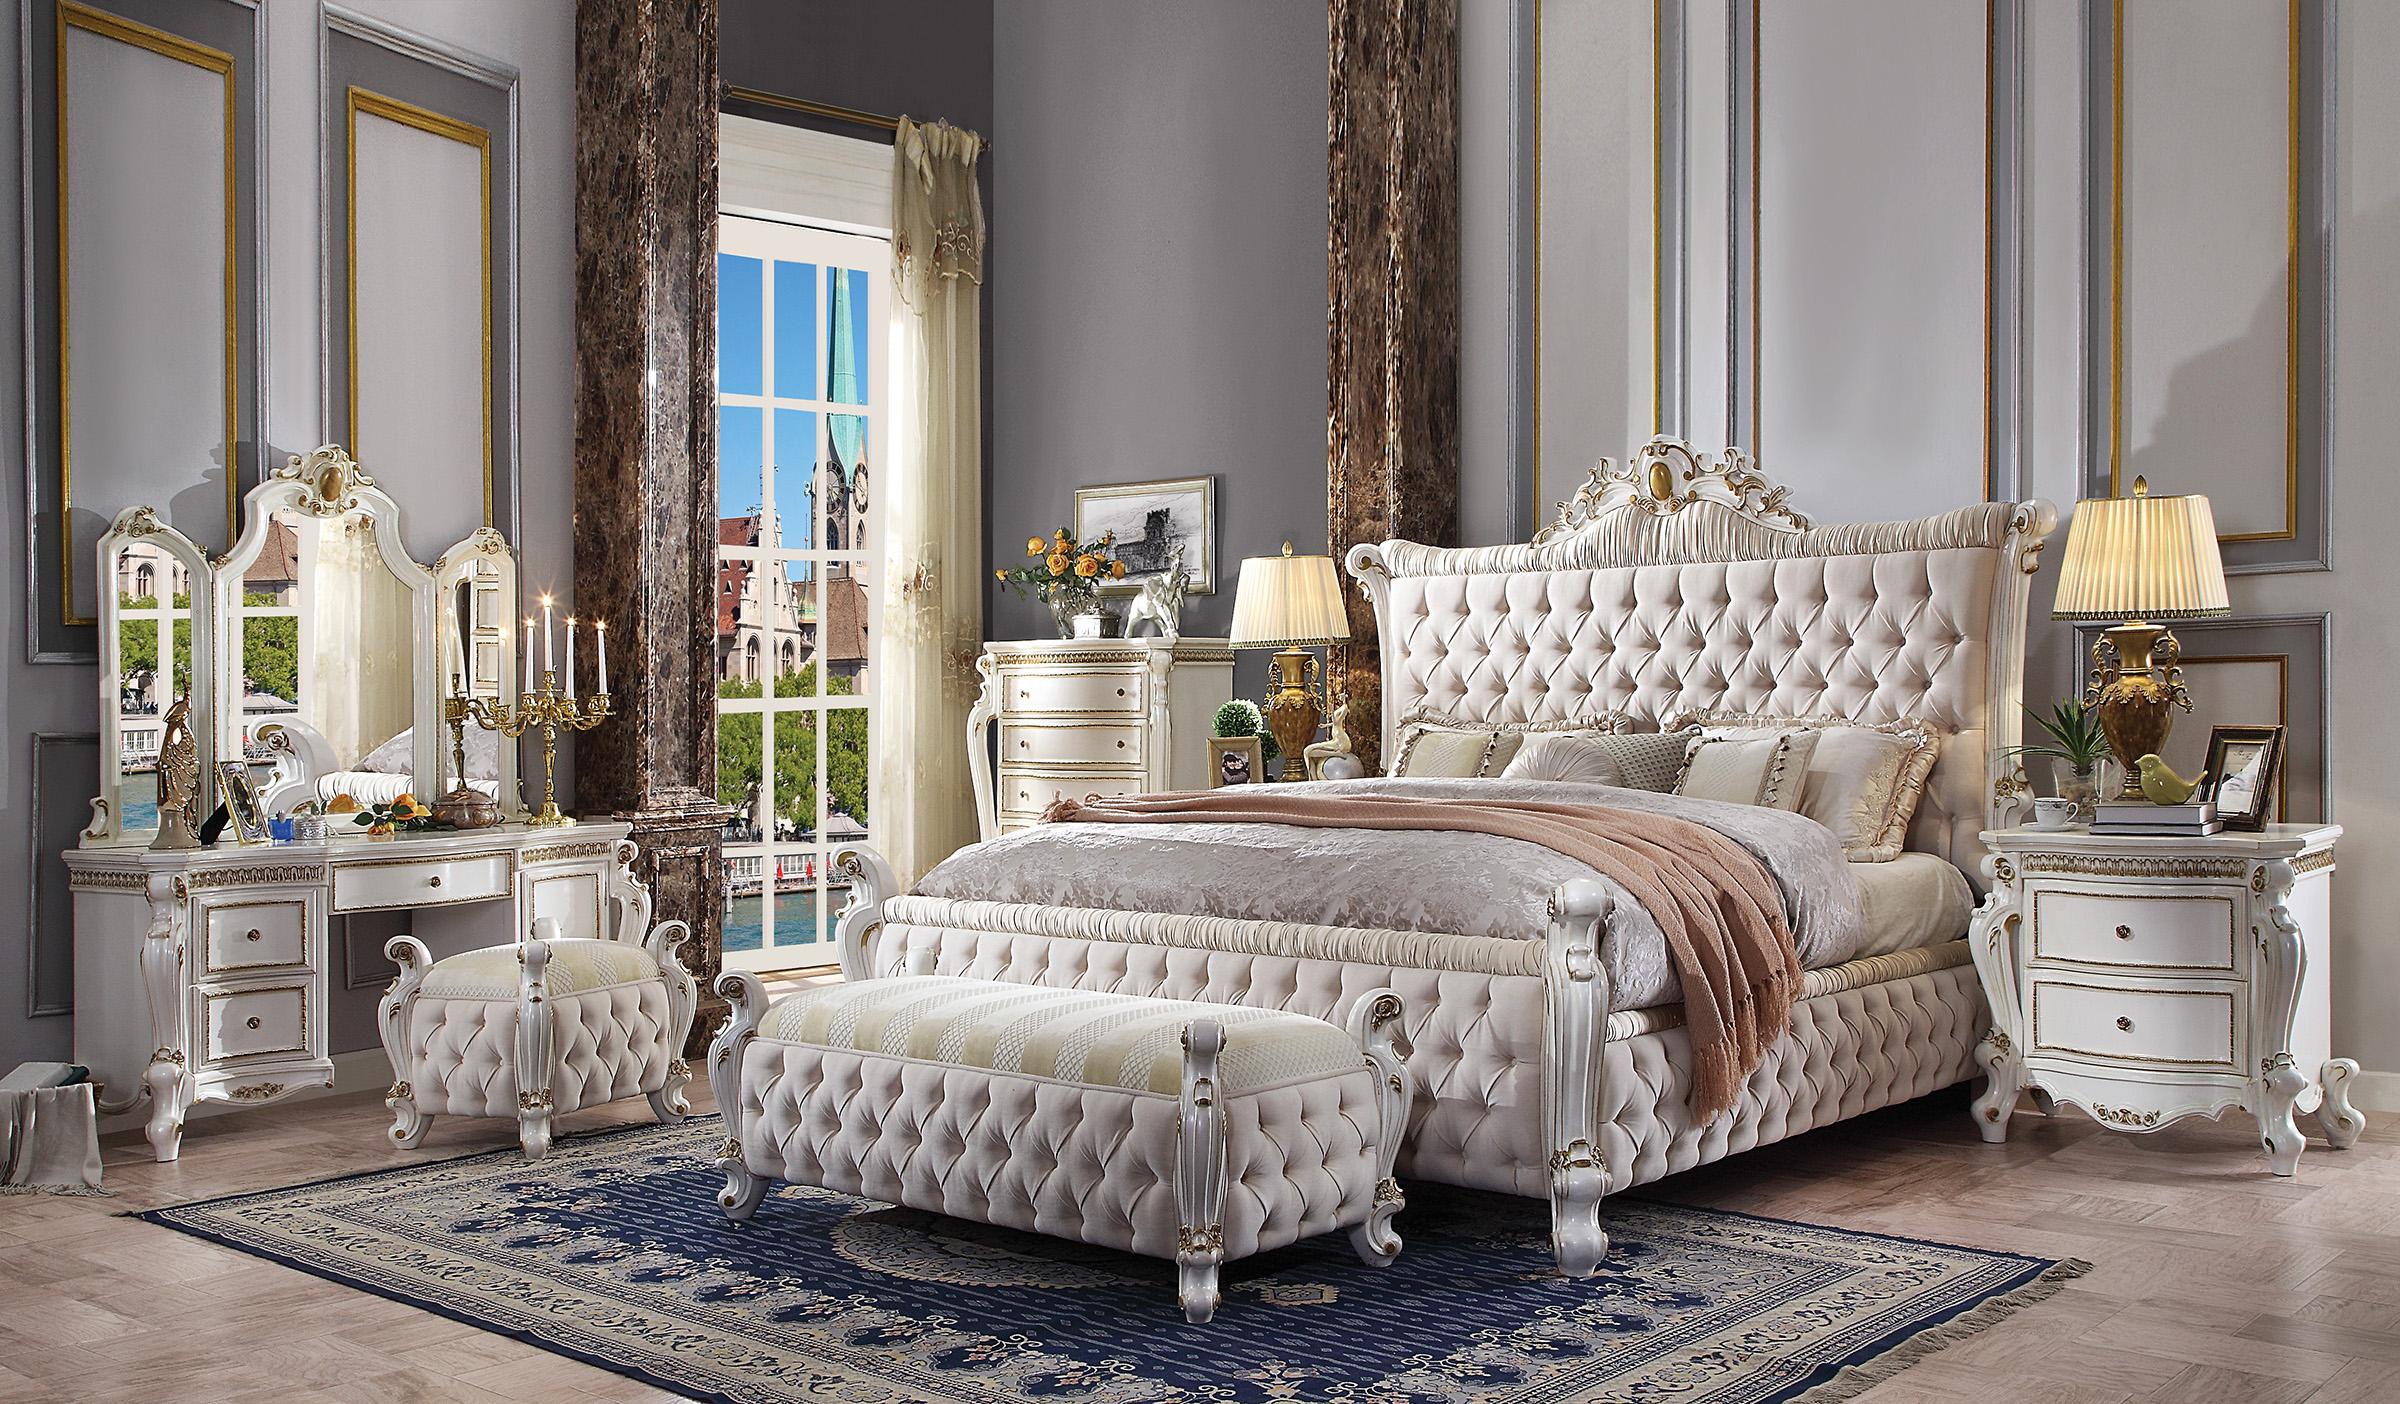 Classic, Traditional Panel Bedroom Set SKU: W000196308 SKU: W000196308 in Antique, Pearl Fabric